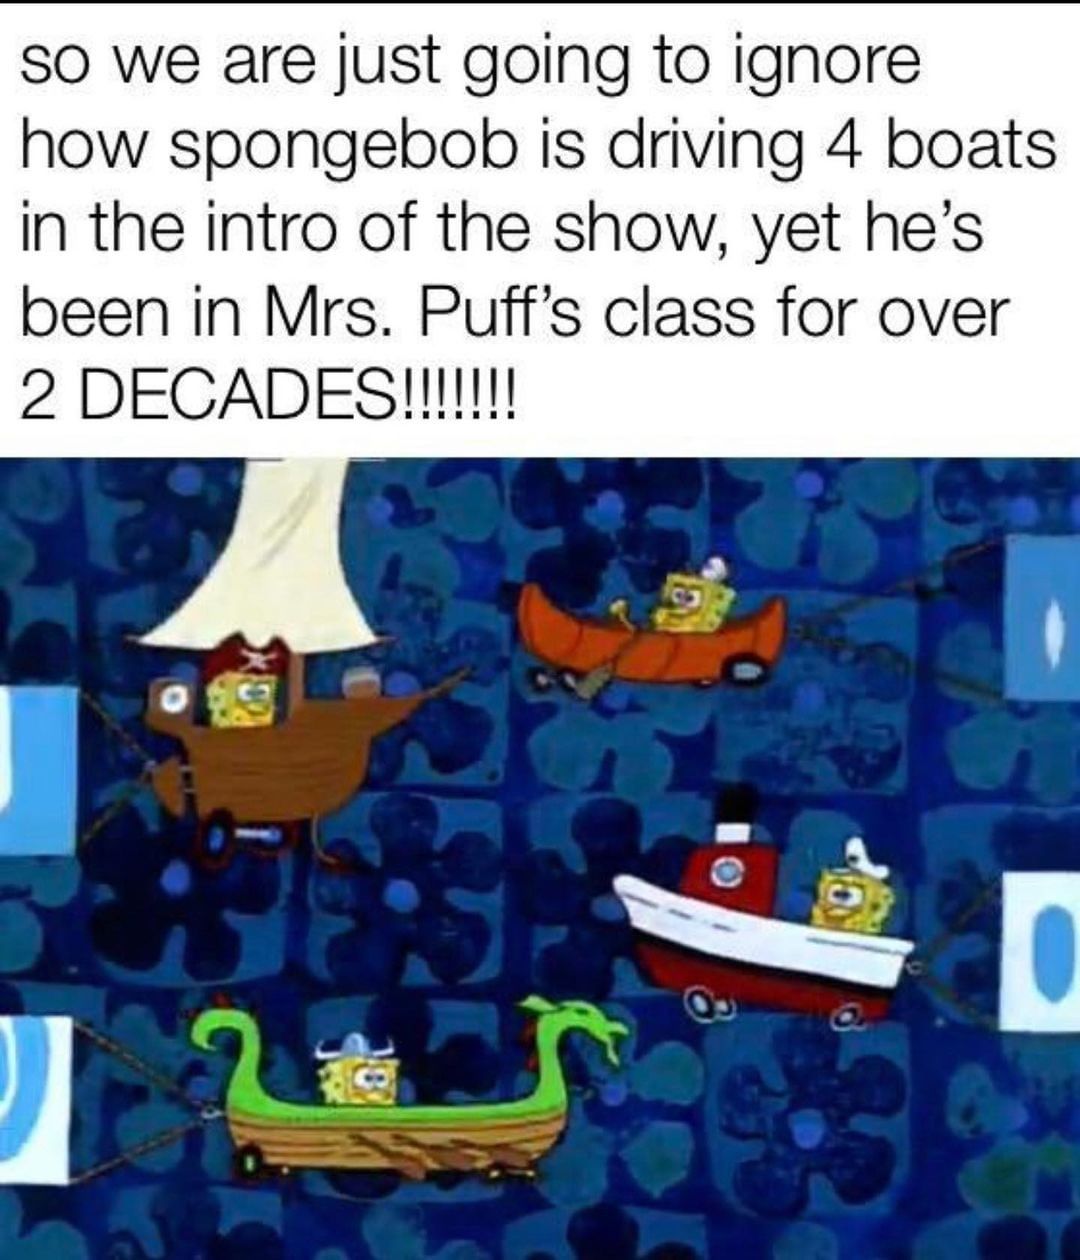 So we are just going to ignore how spongebob is driving 4 boats in the intro of the show, yet he's been in Mrs. Puff's class for over 2 decades!!!!!!!